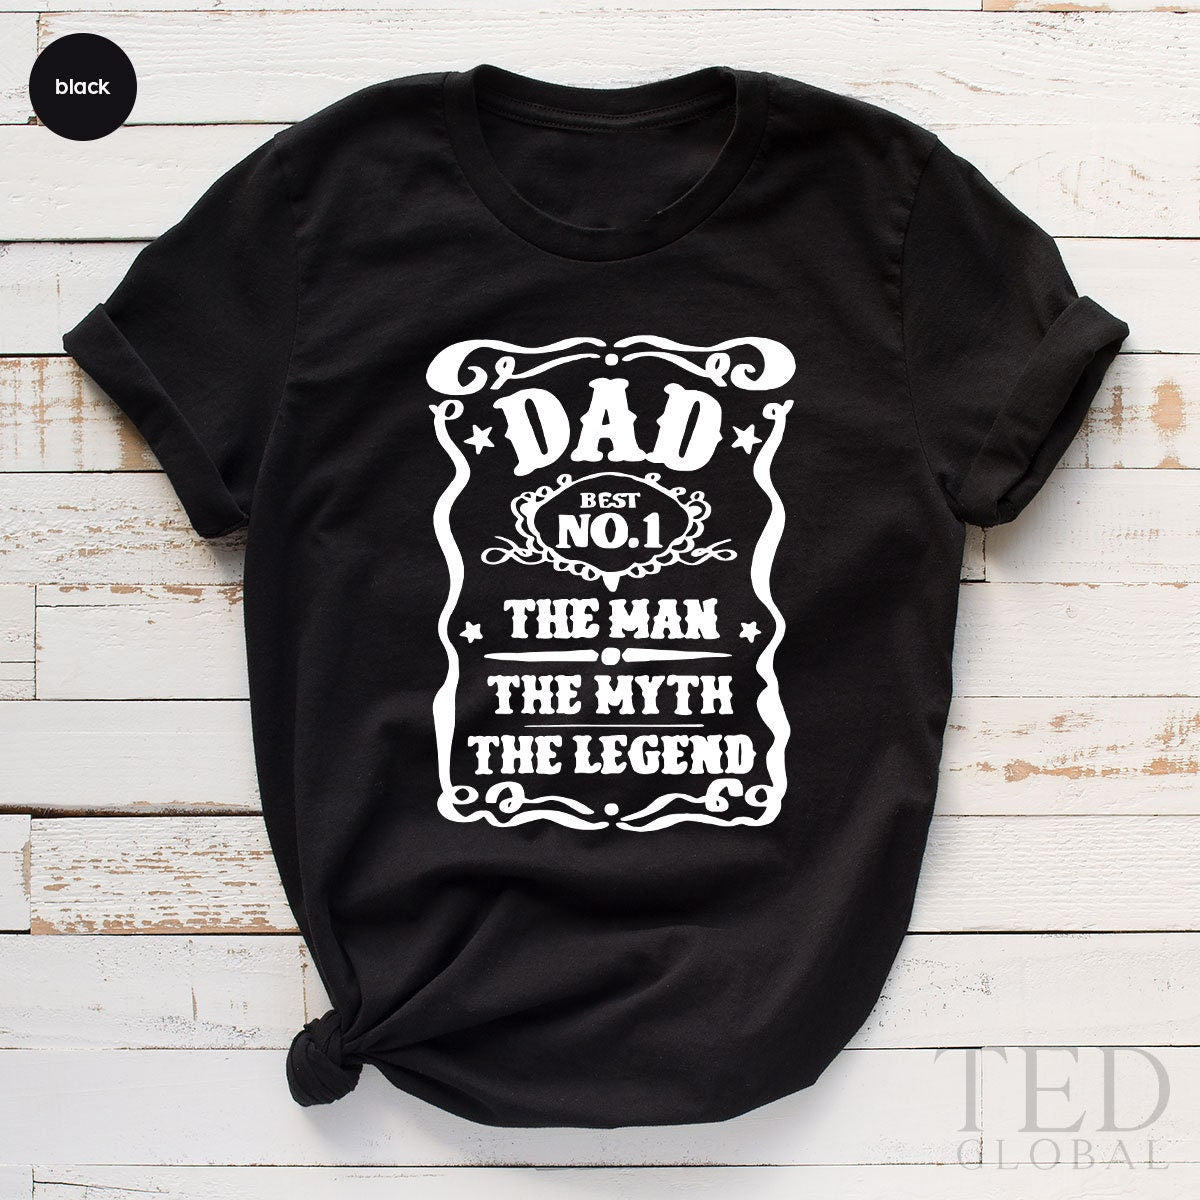 Funny Dad Shirt, Fathers Day Tee, Gift for Dad, Dad Shirt, Best Dad Shirt, Dad to Shirt, Fathers Day Gifts, Gift for Husband, Cool Dad Shirt